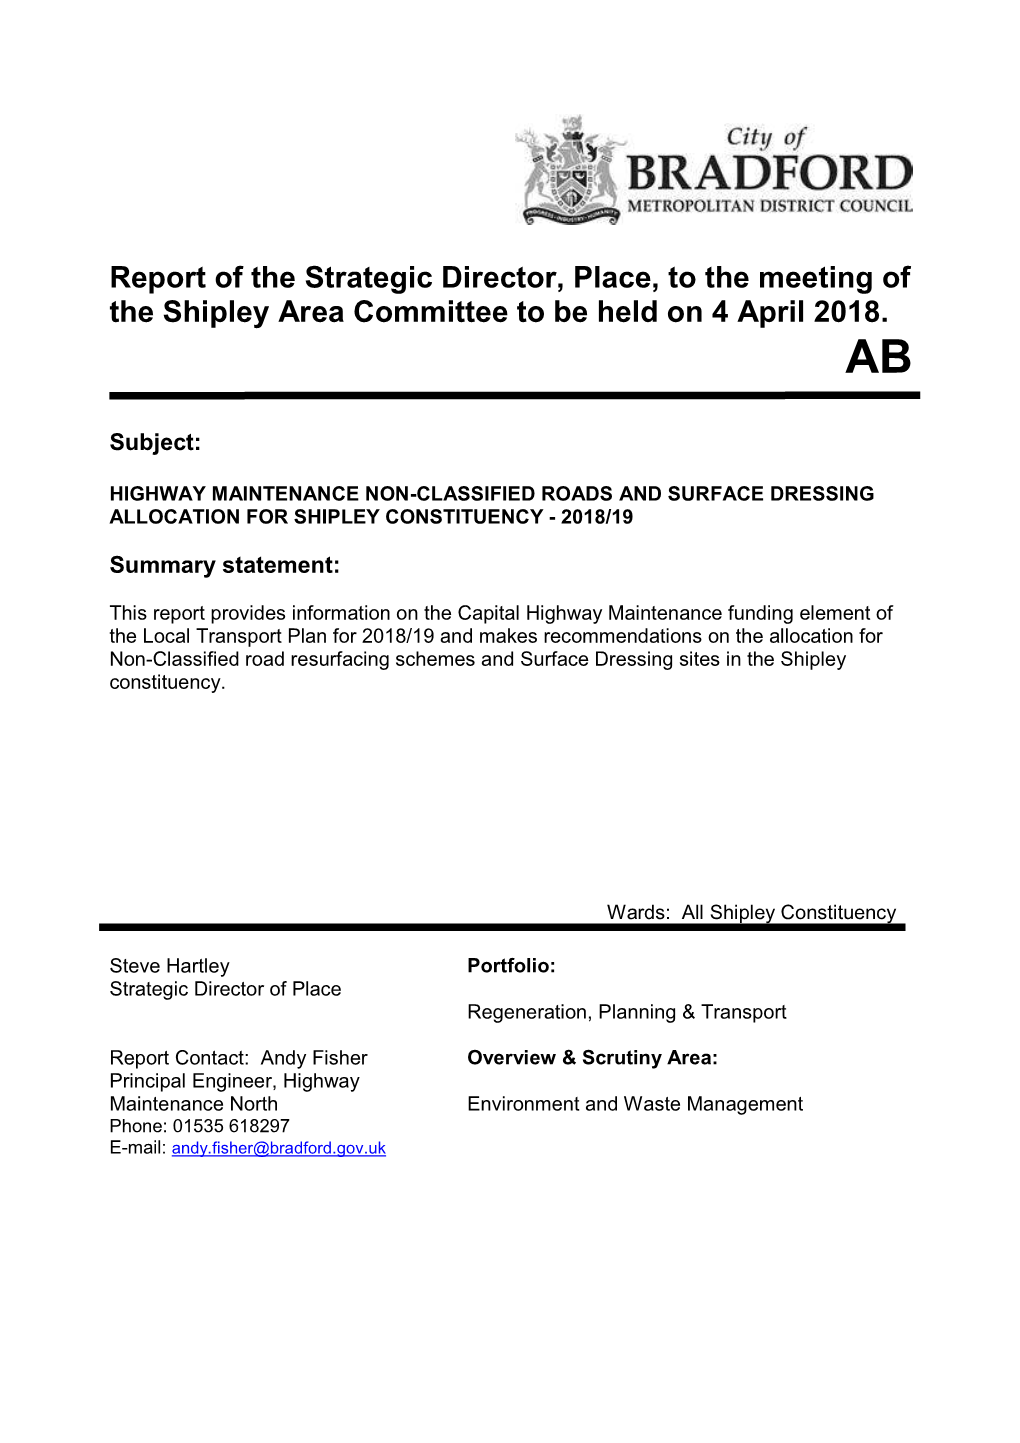 Report of the Strategic Director, Place, to the Meeting of the Shipley Area Committee to Be Held on 4 April 2018. AB